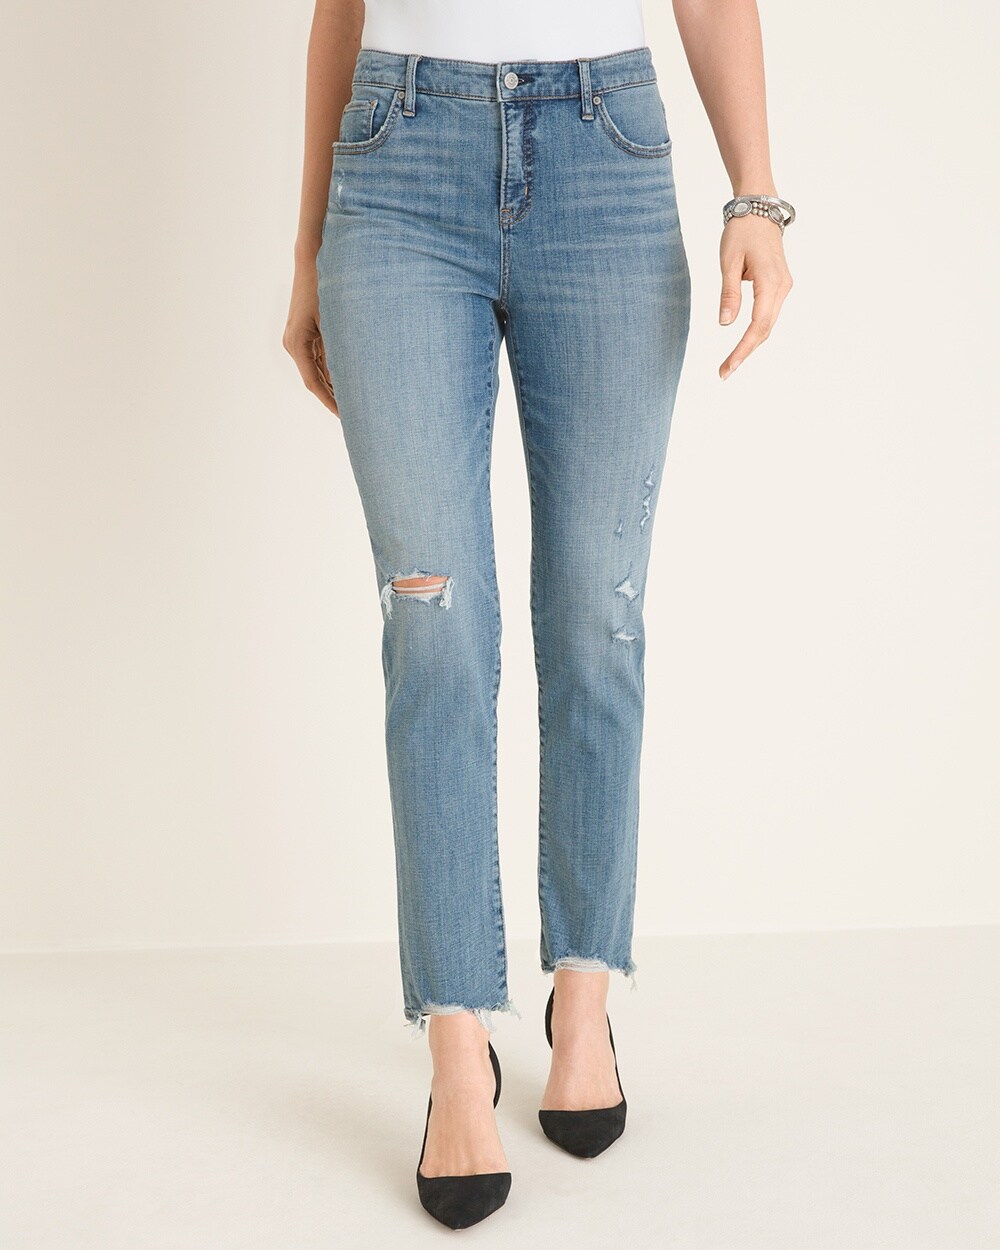 So Slimming Distressed Girlfriend Ankle Jeans